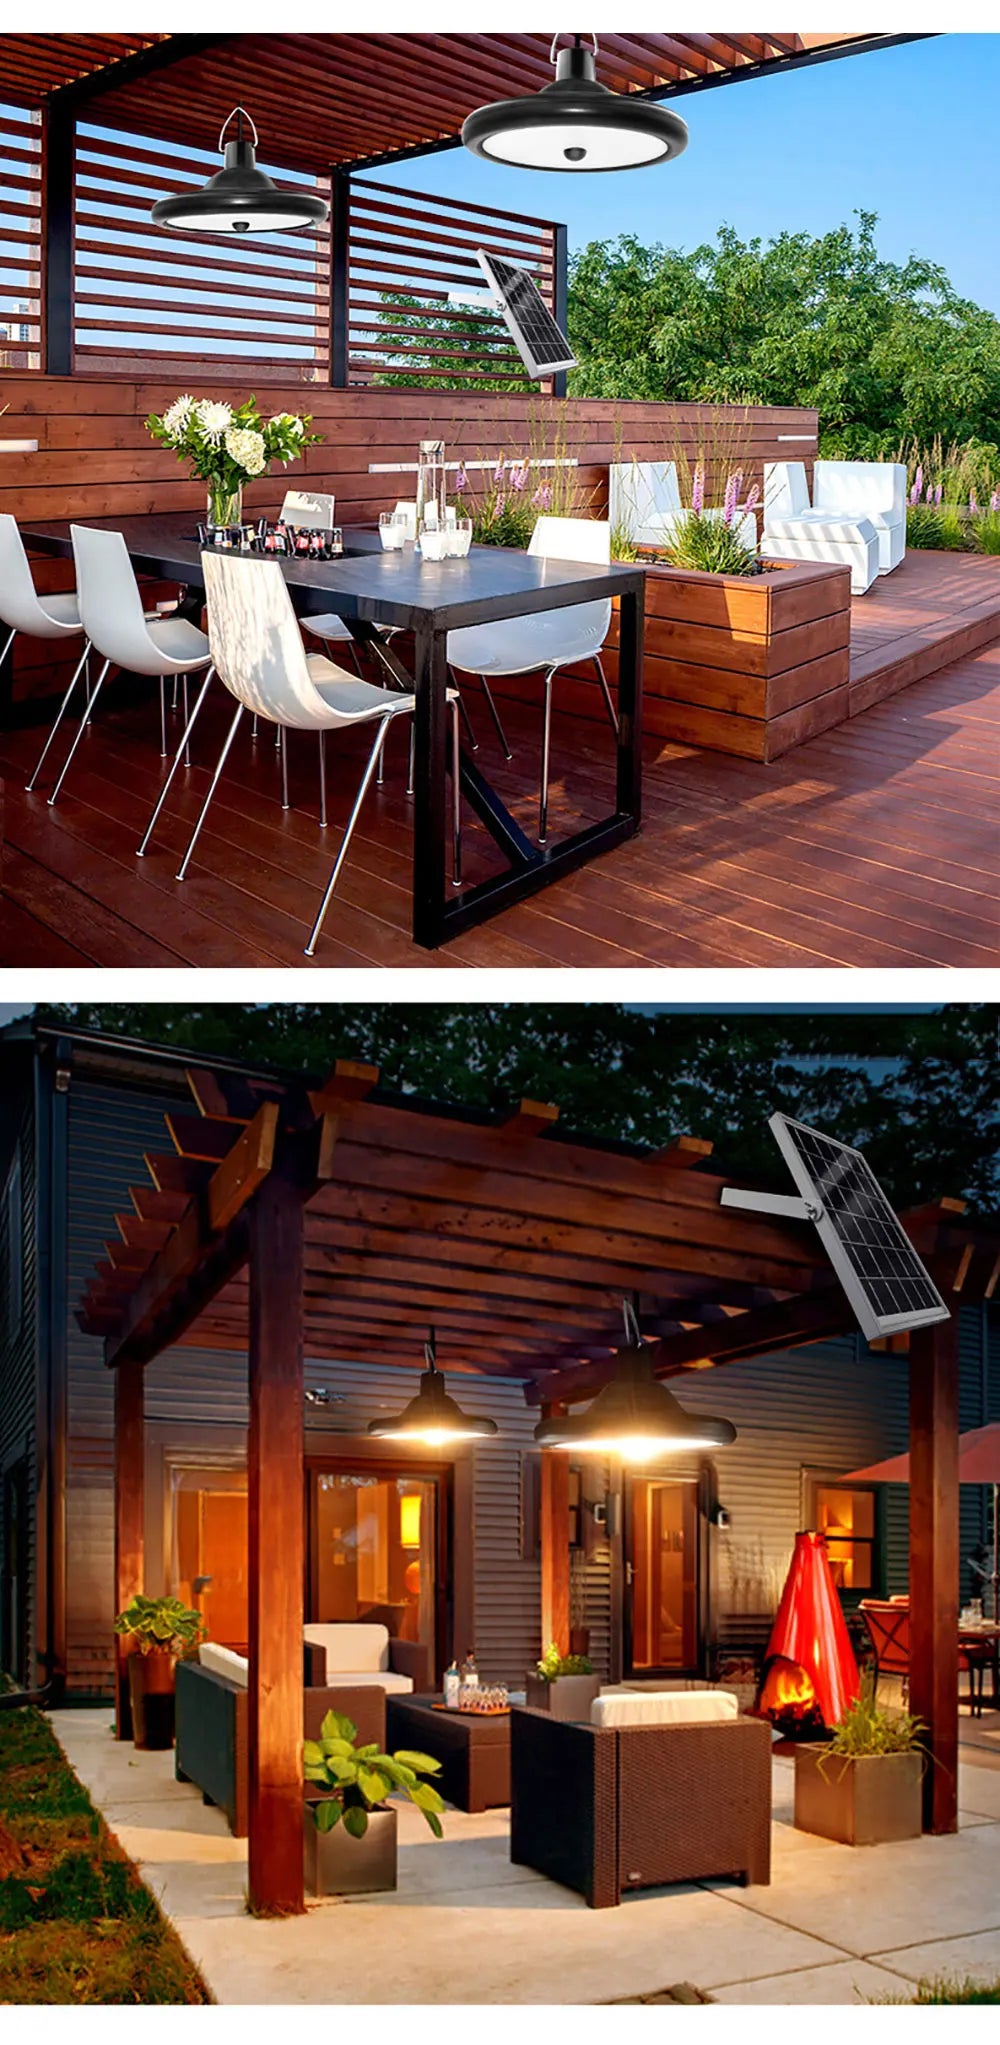 Double Head Solar Pendant Light, Solar-powered lighting with fast charging and long illumination.